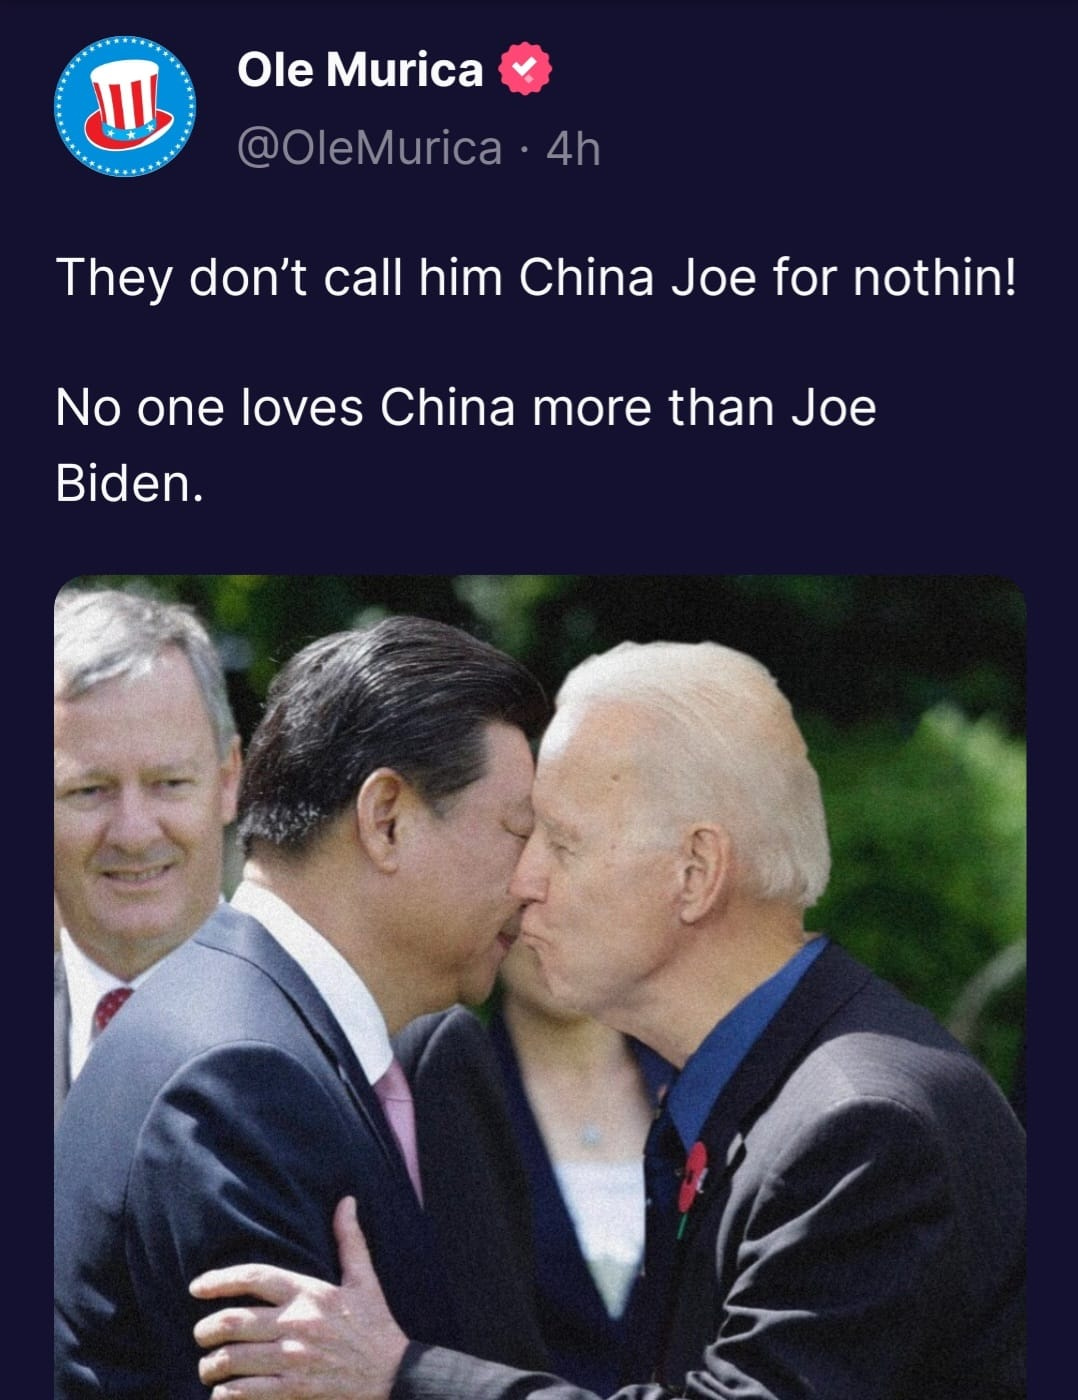 May be a Twitter screenshot of 2 people and text that says '山 Ole Murica Murica @OleMurica 4h They don't call him China Joe for nothin! No one loves China more than Joe Biden.'